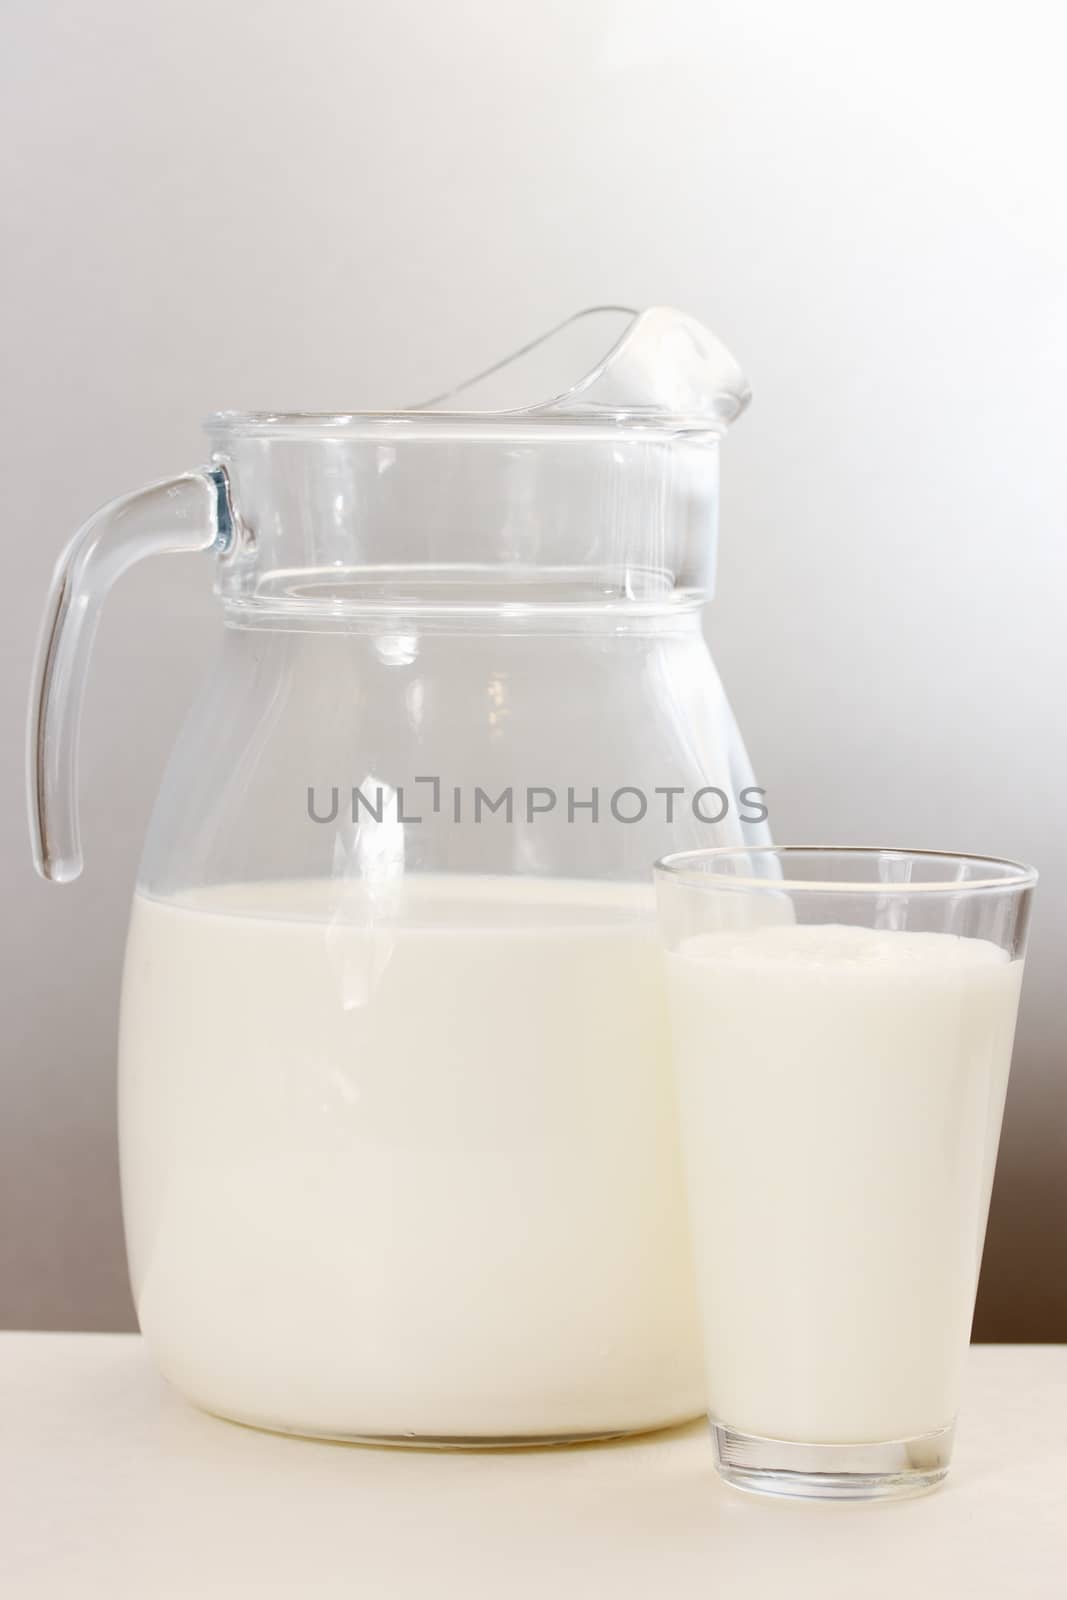 transparent decanter and glass filled with milk